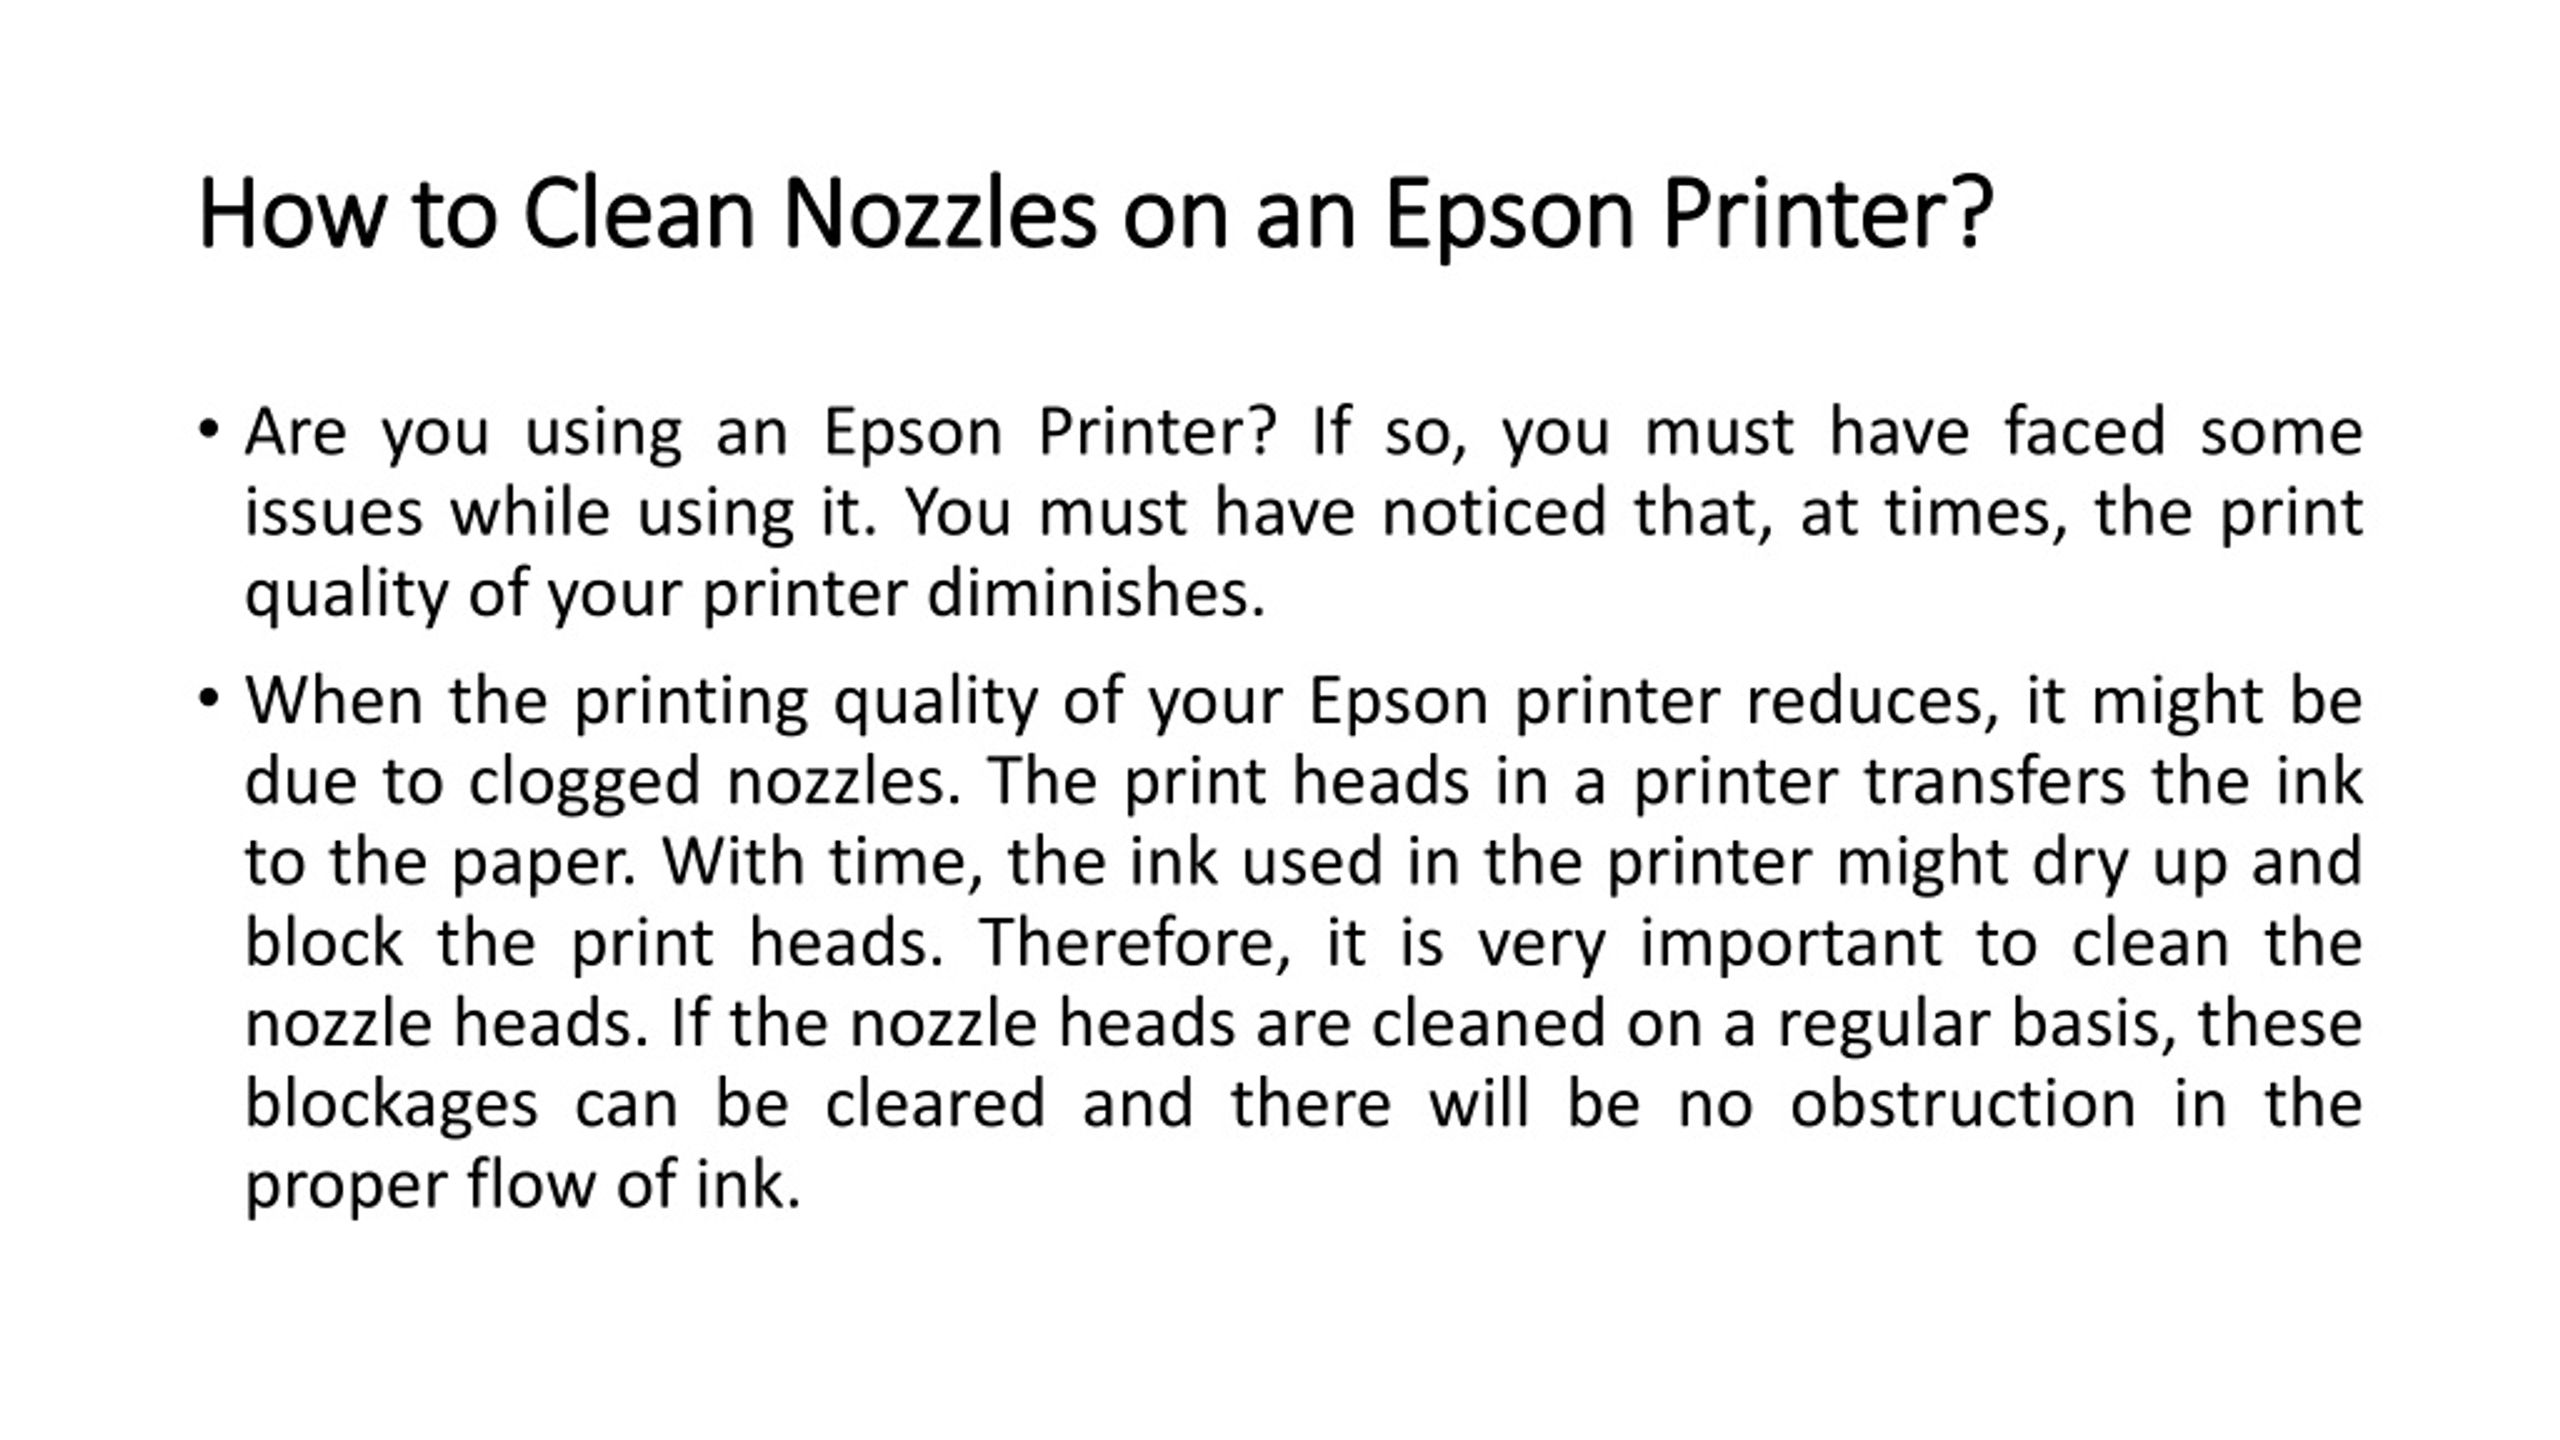 Ppt How To Clean Nozzles On An Epson Printer Powerpoint Presentation Id8420356 9014